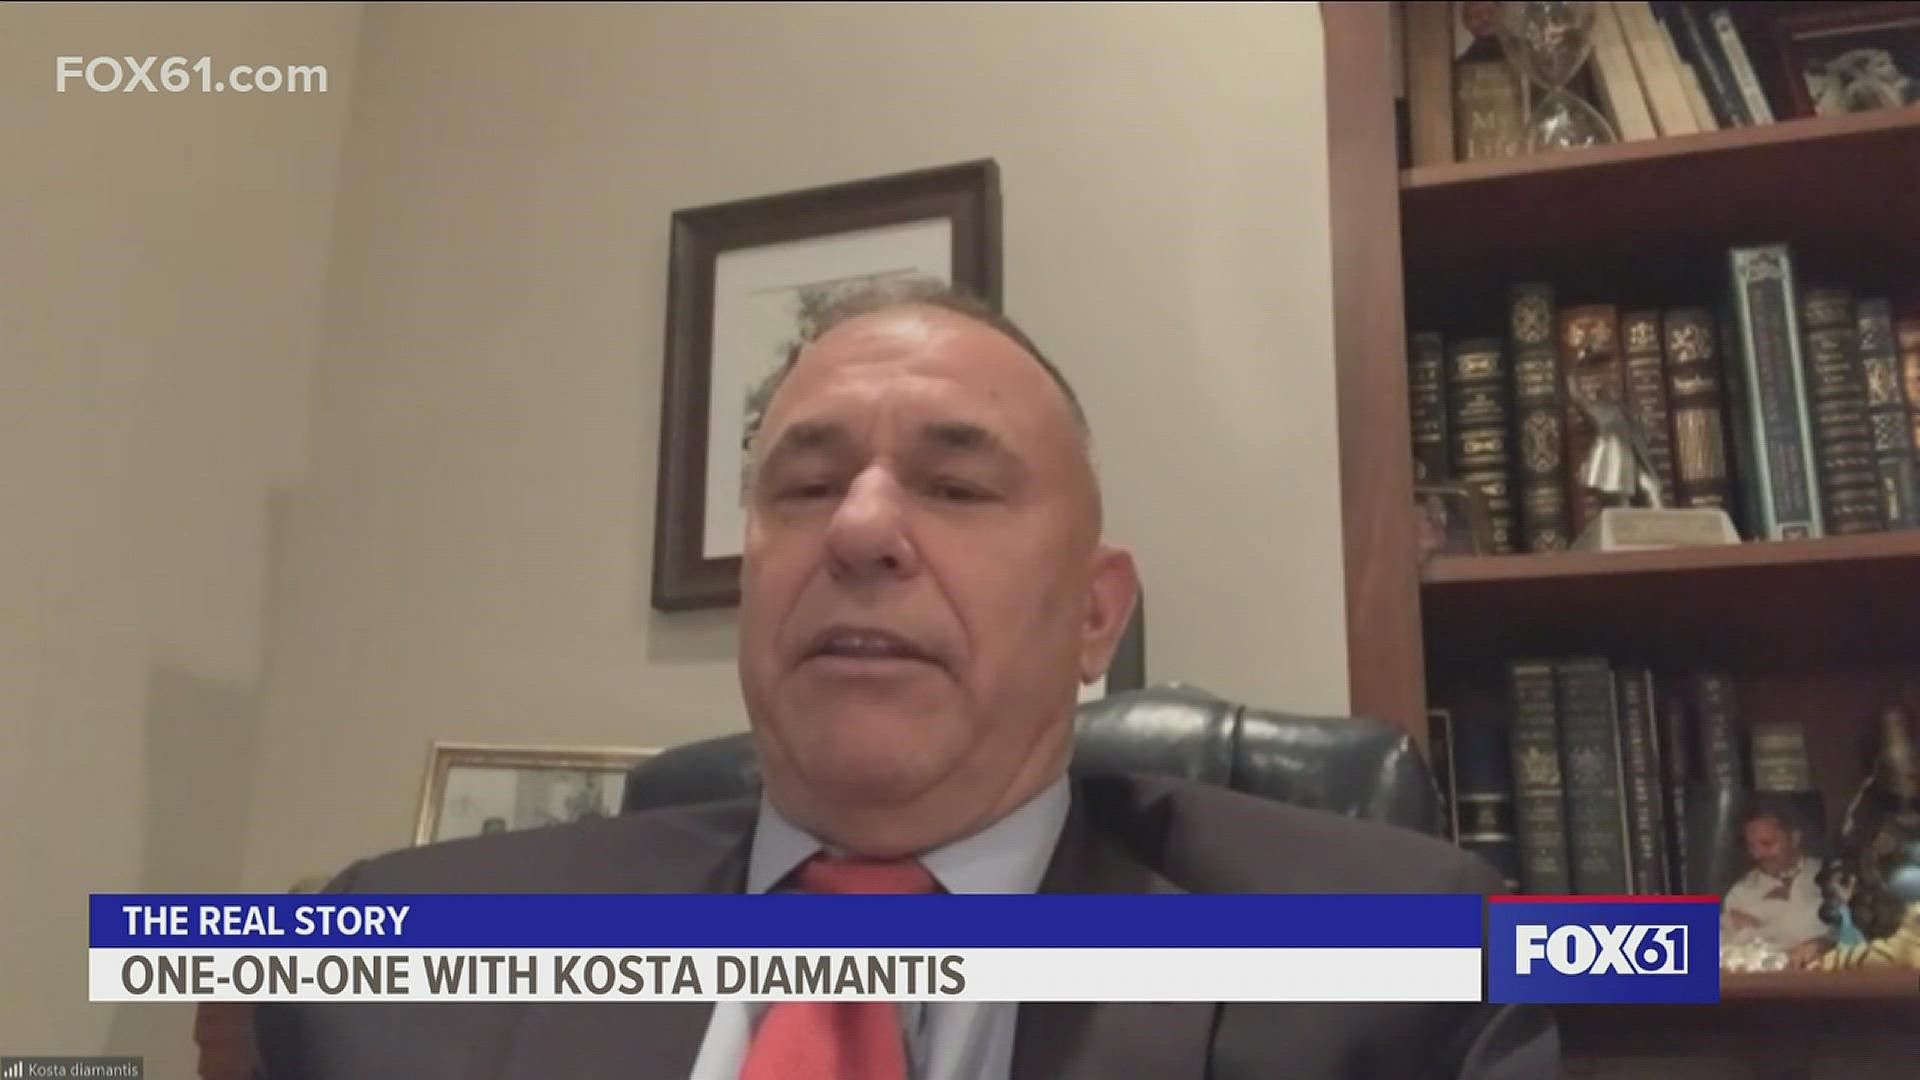 Kosta Diamantis speaks one-on-one with FOX61's Jenn Bernstein about the accusations against him